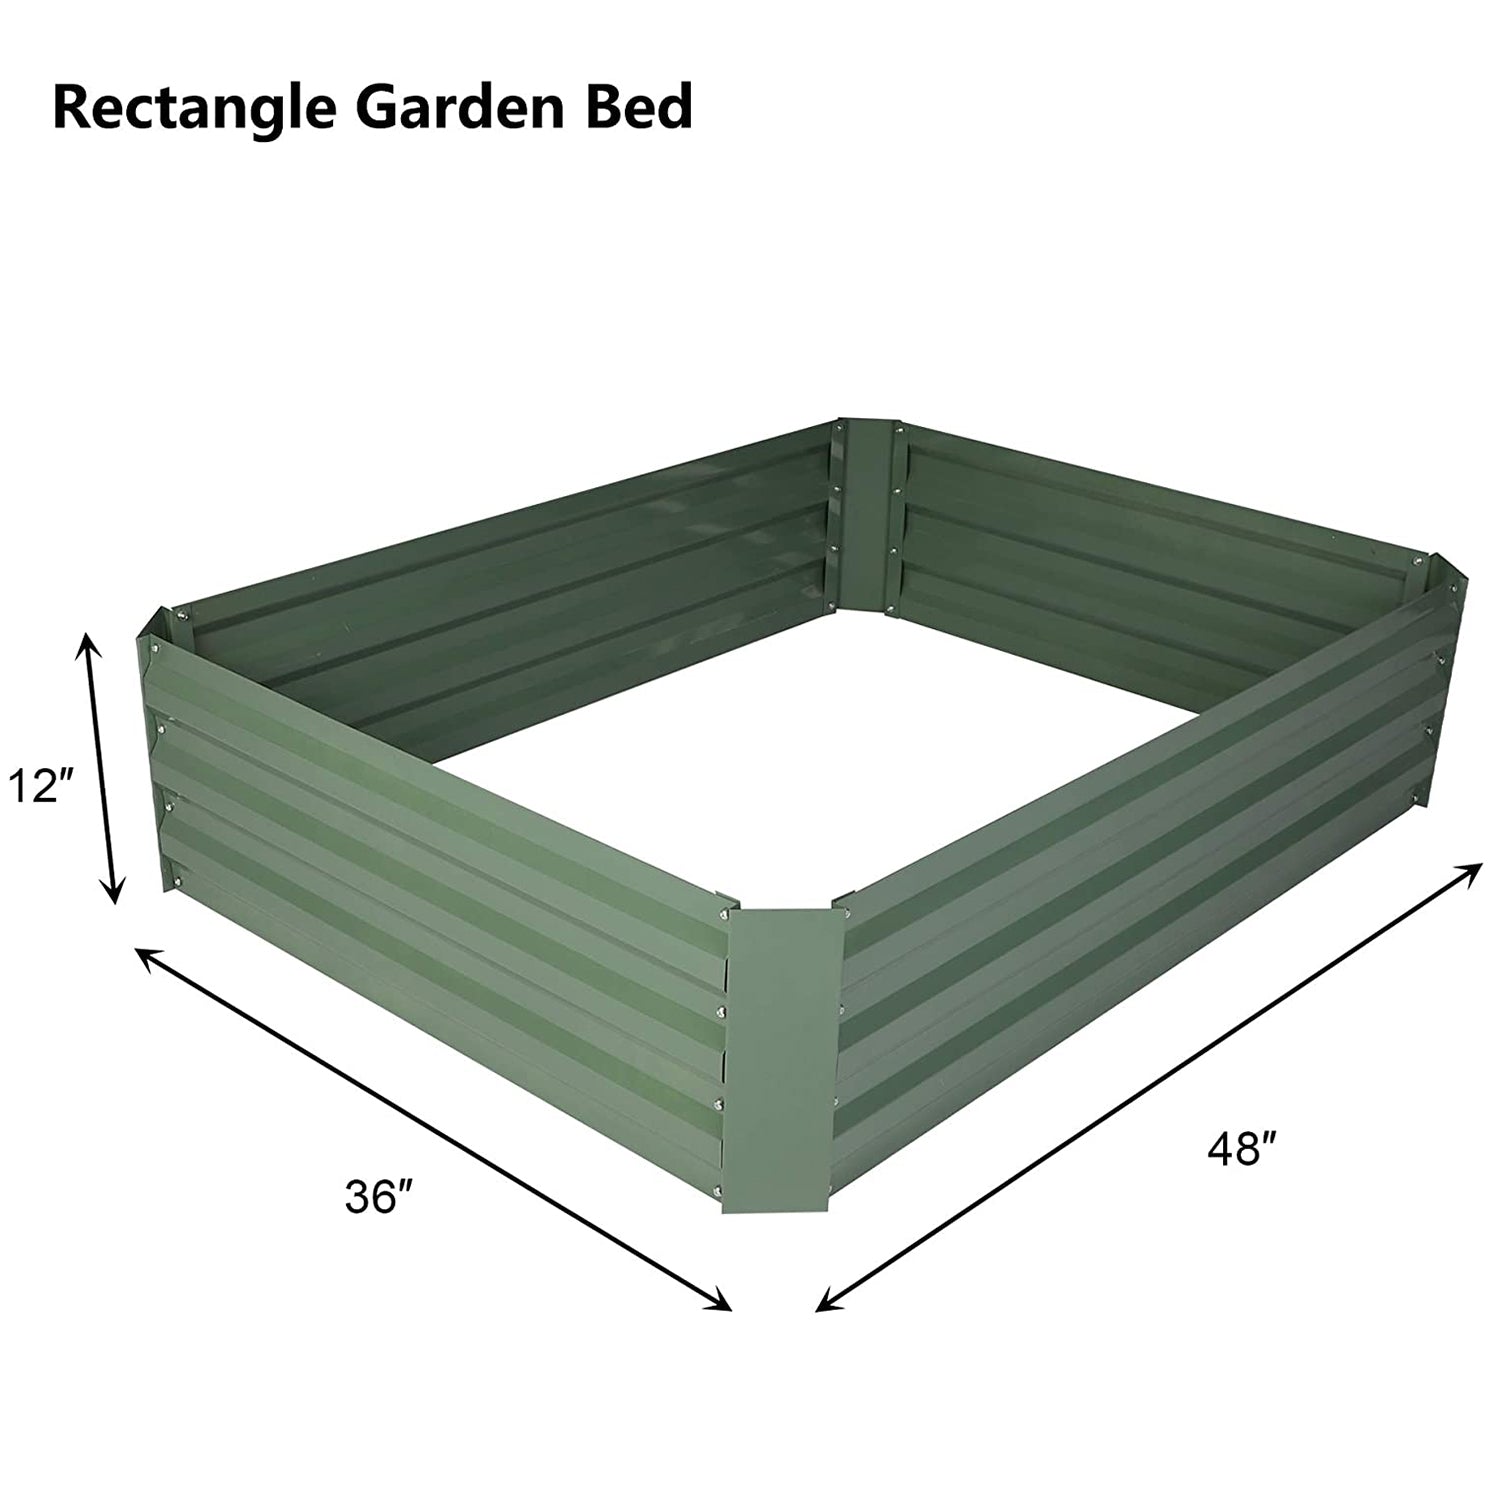 48"x36"x12" Raised Garden Bed Galvanized Planter Box Anti-Rust Coating Planting Vegetables Herbs and Flowers